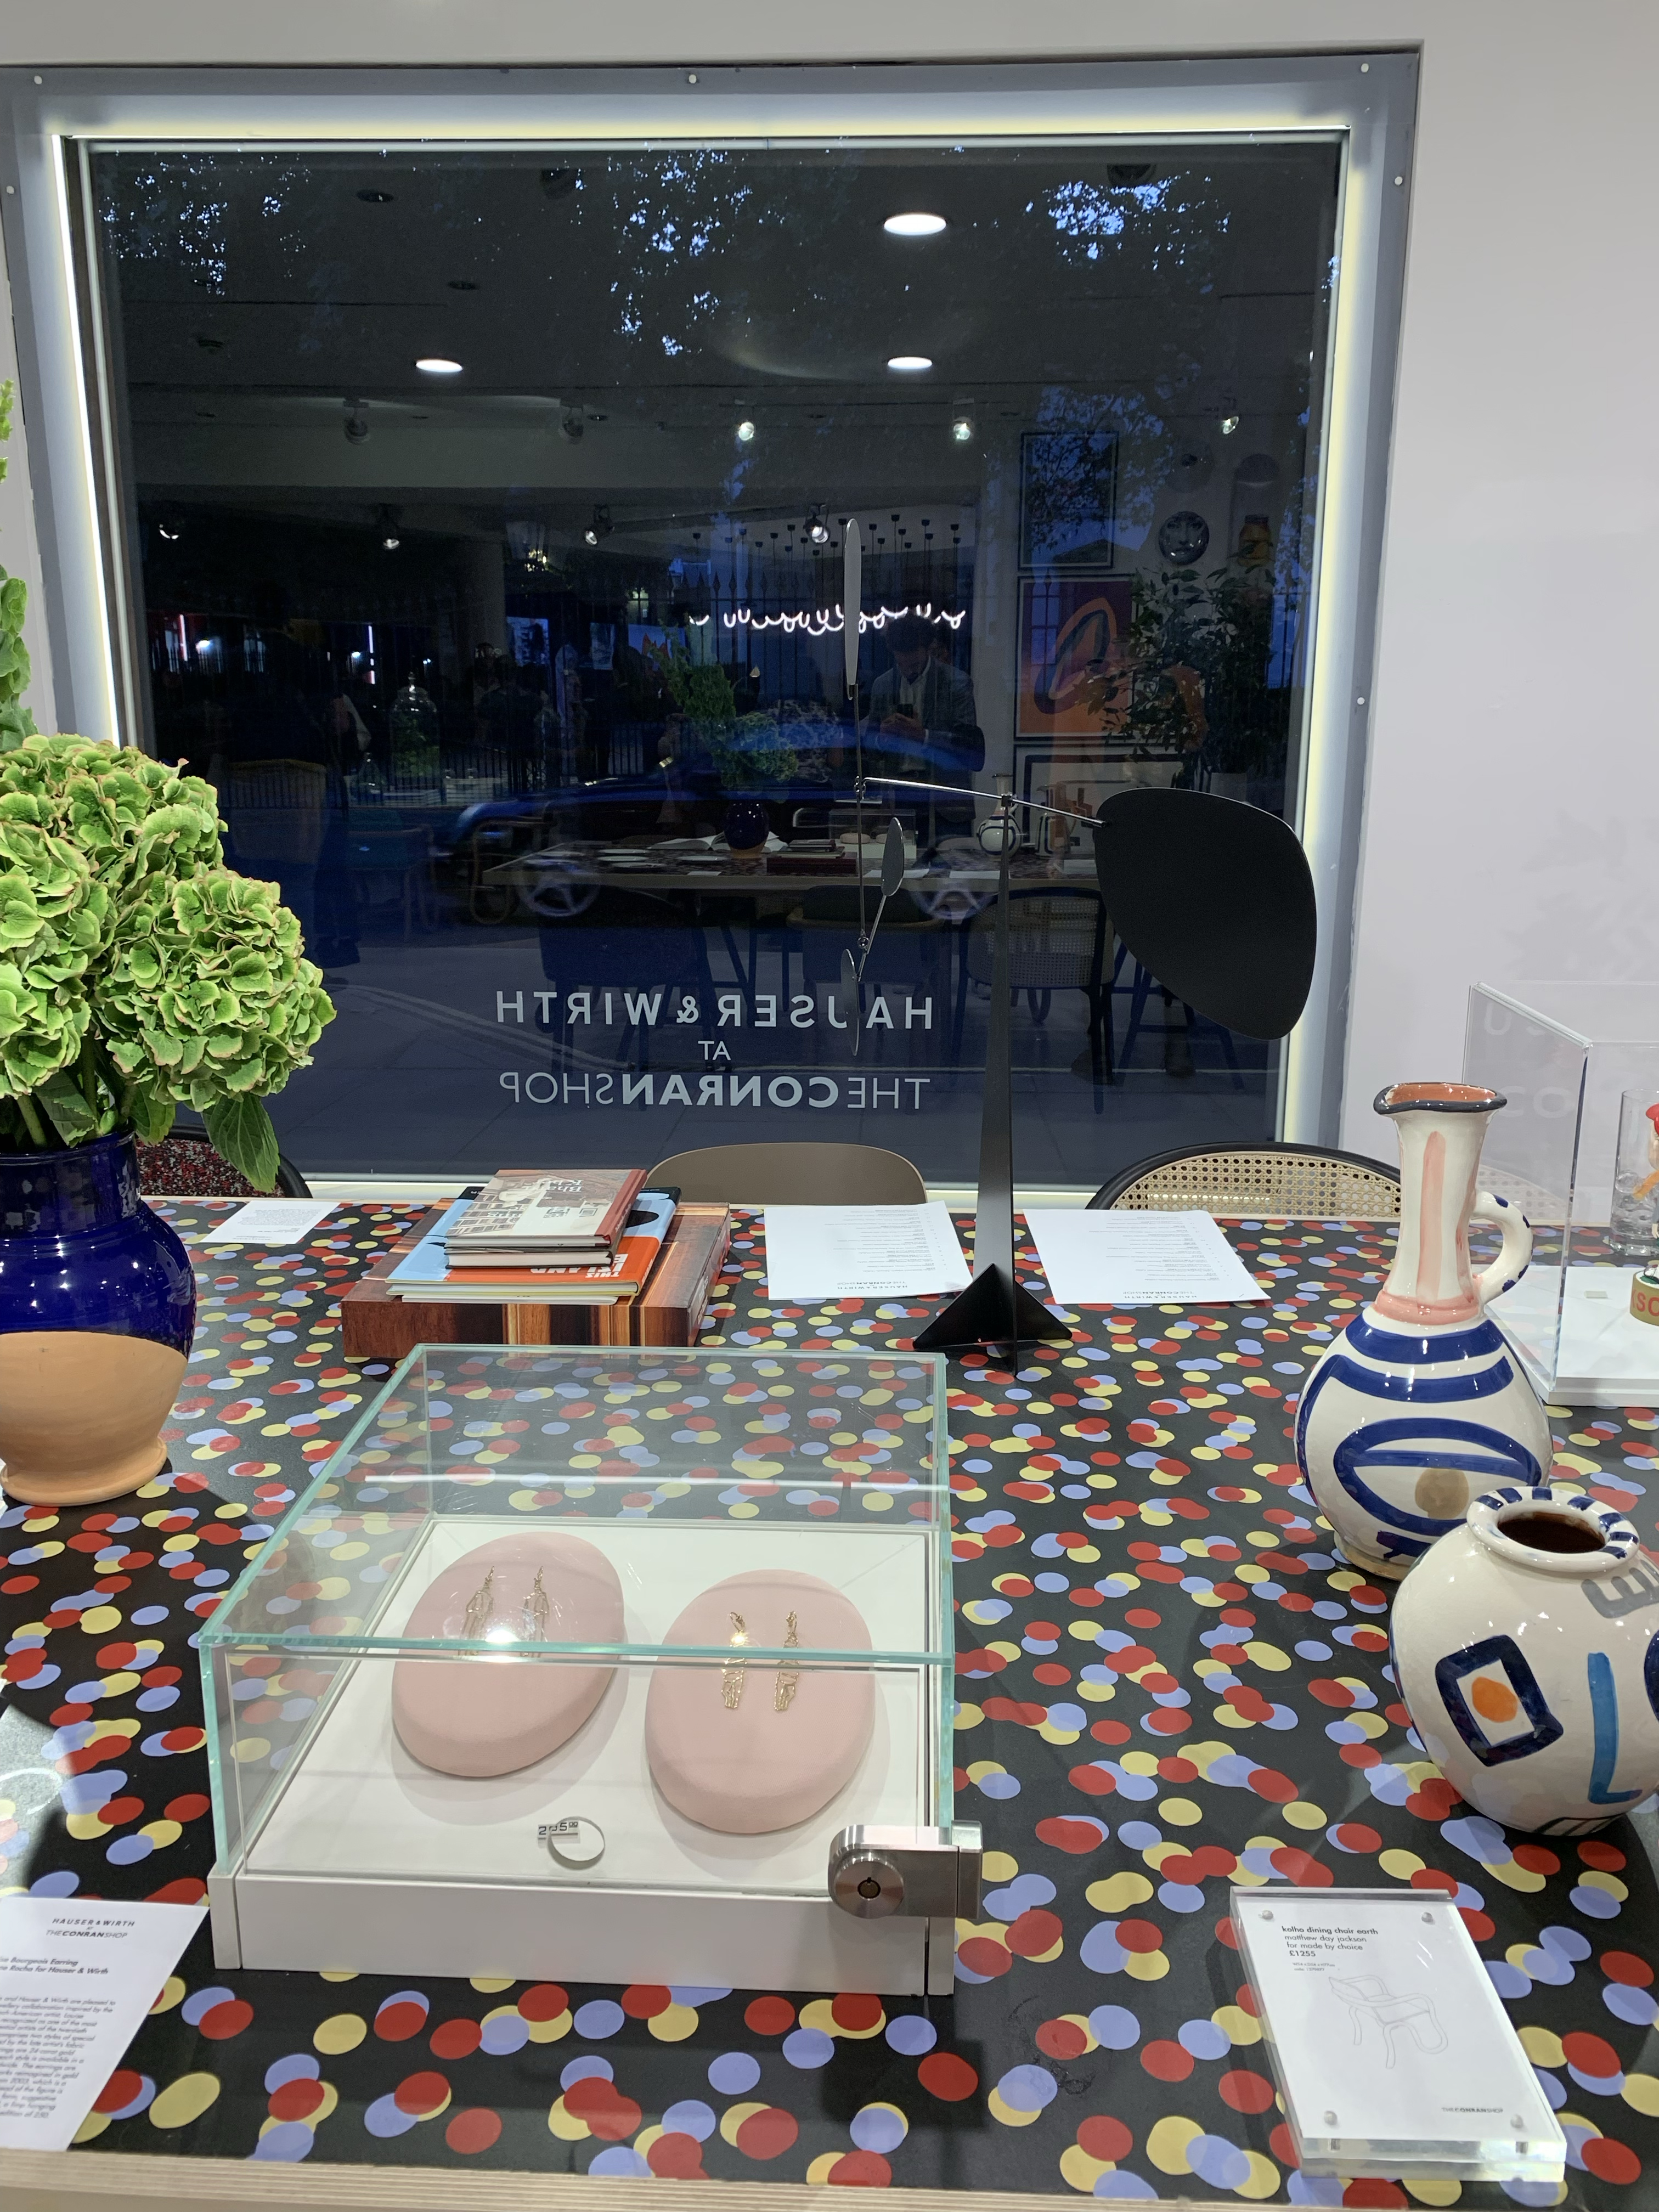 The Conran Shop table and window